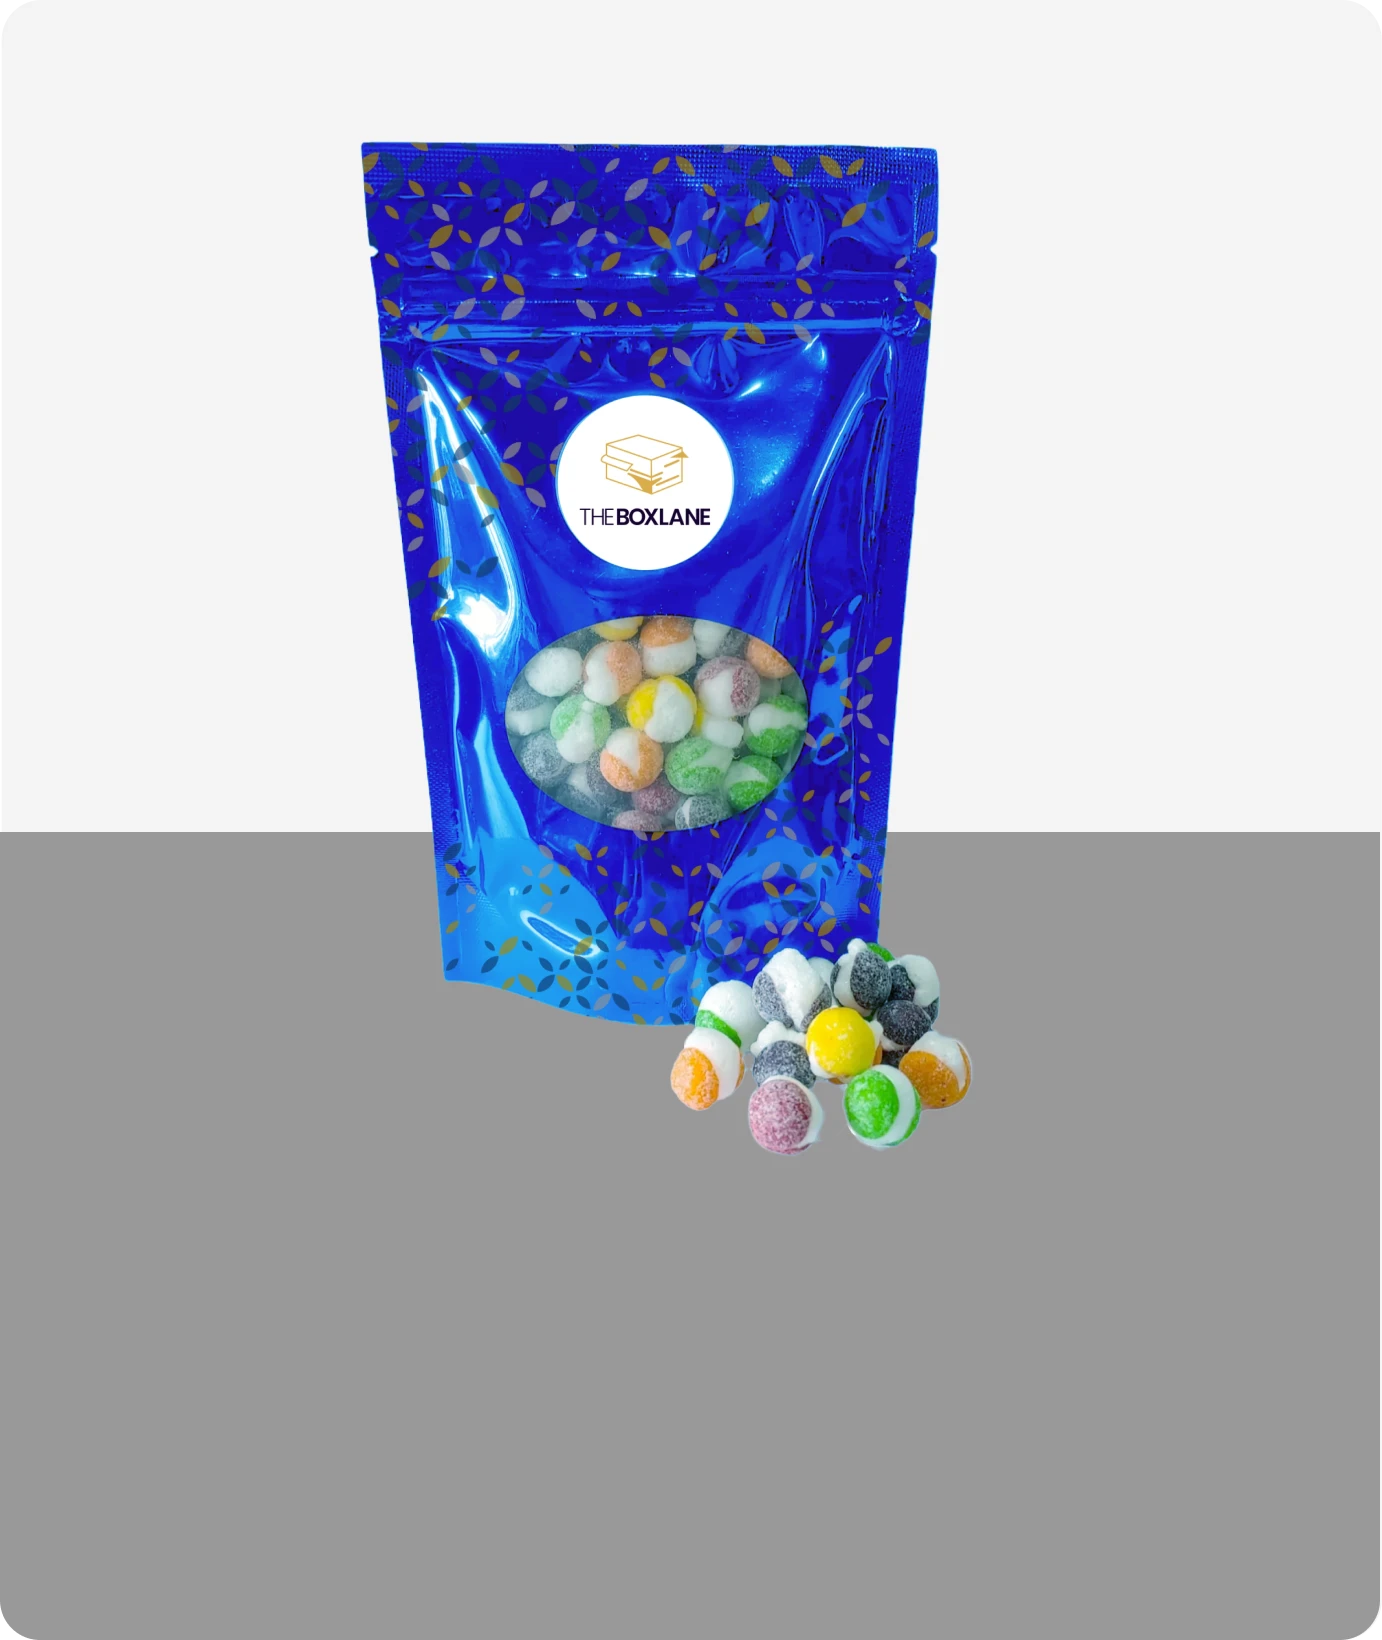 Freeze Dried Candy Packaging related products image | The Box Lane